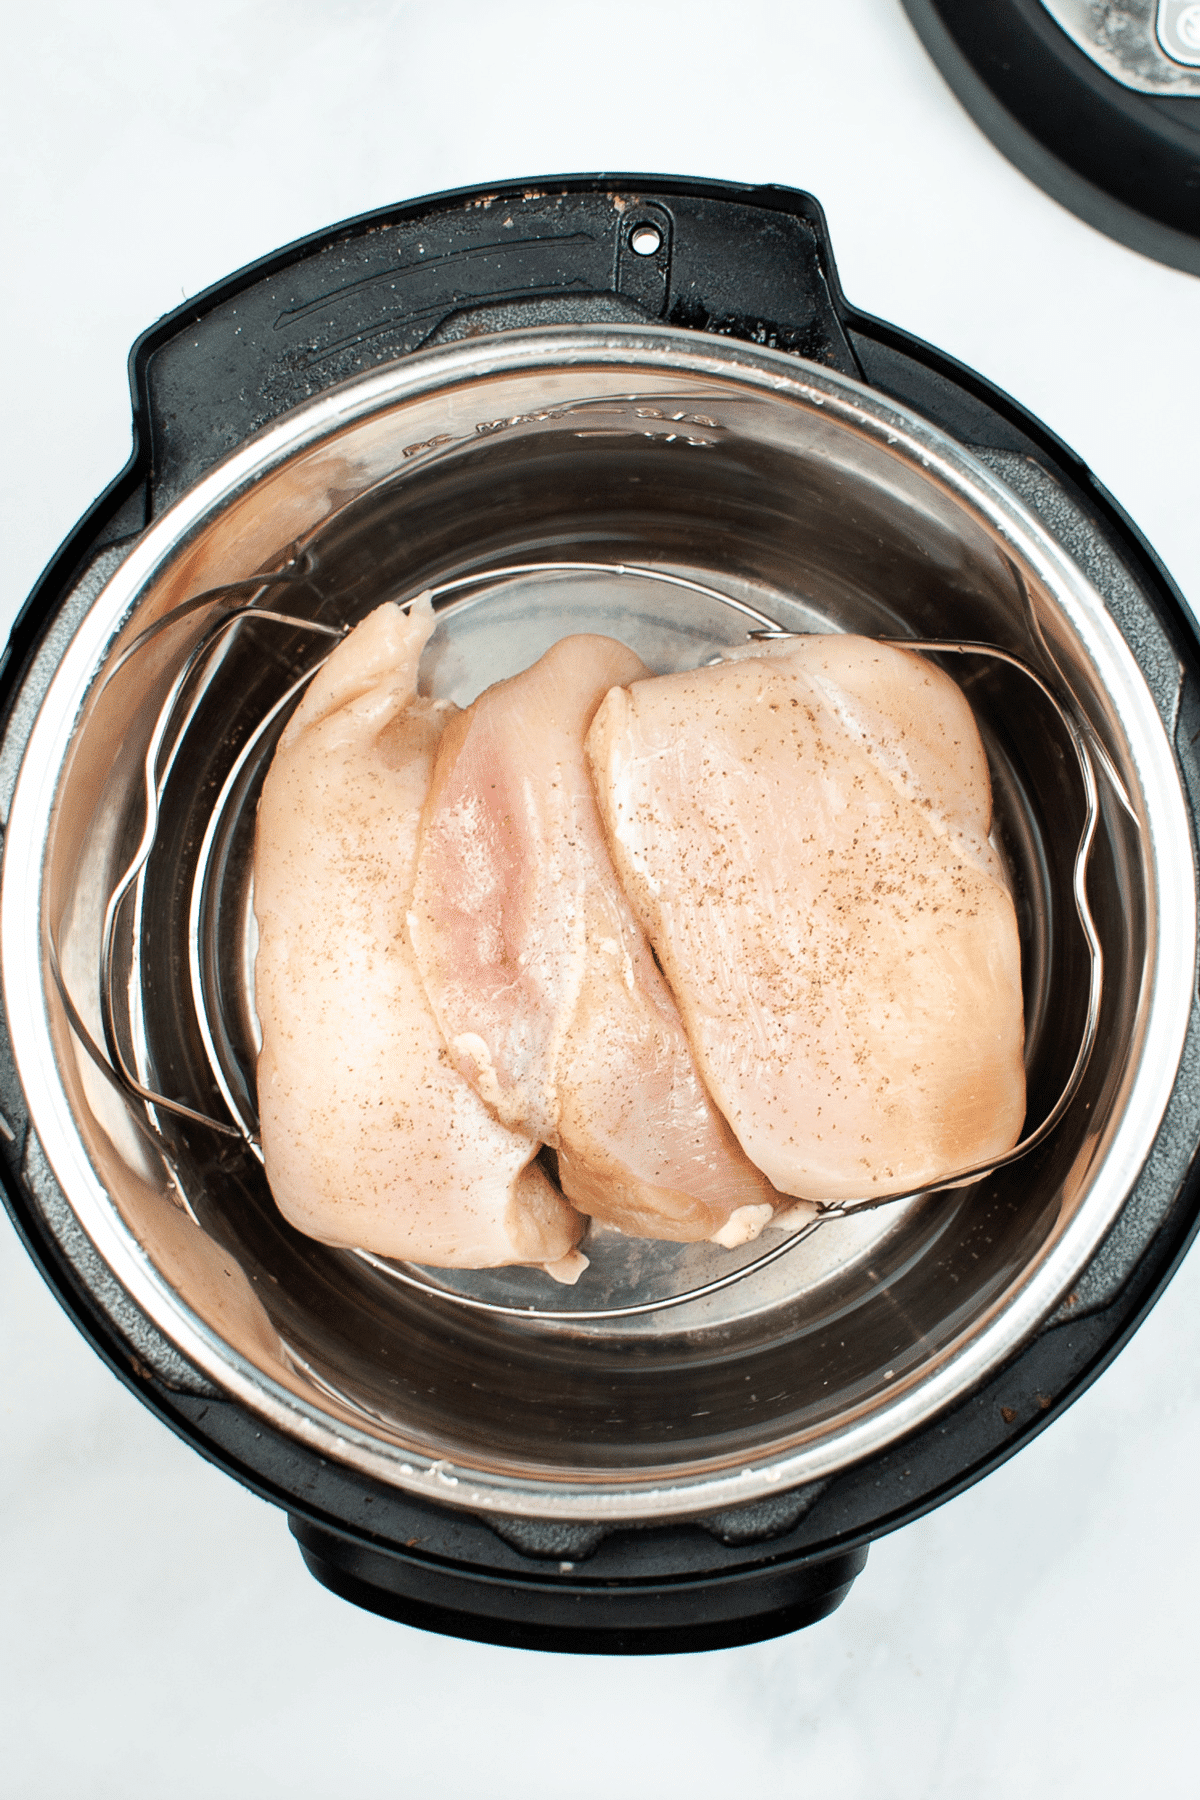 Adding the chicken meat to boil in instant pot